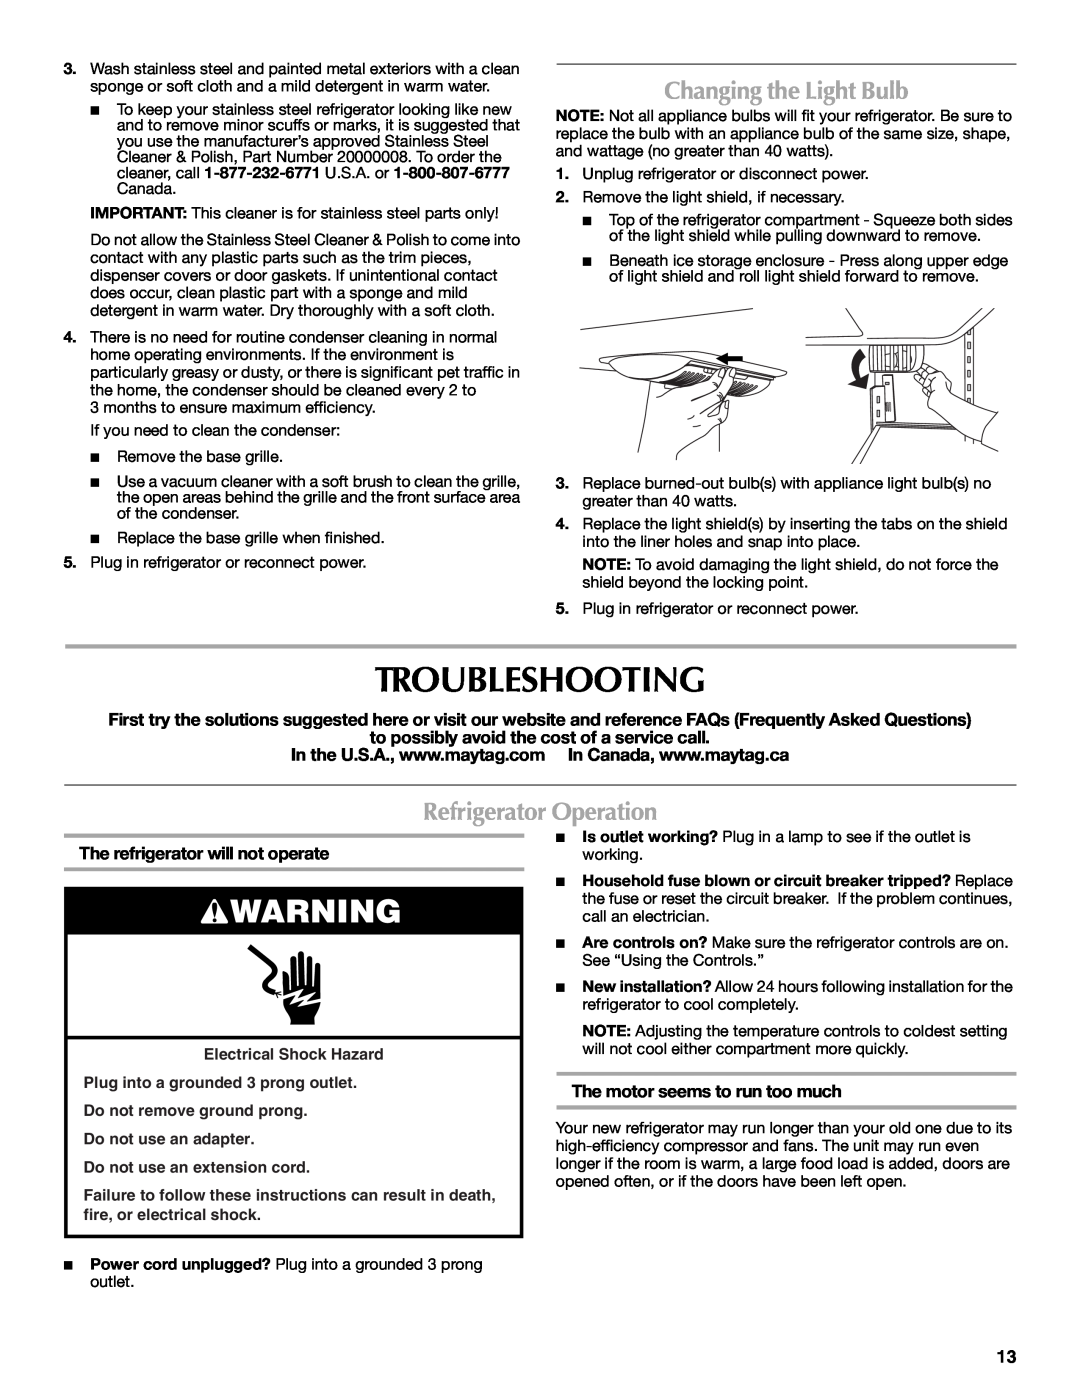 Maytag 12828186A Troubleshooting, Changing the Light Bulb, Refrigerator Operation, The refrigerator will not operate 